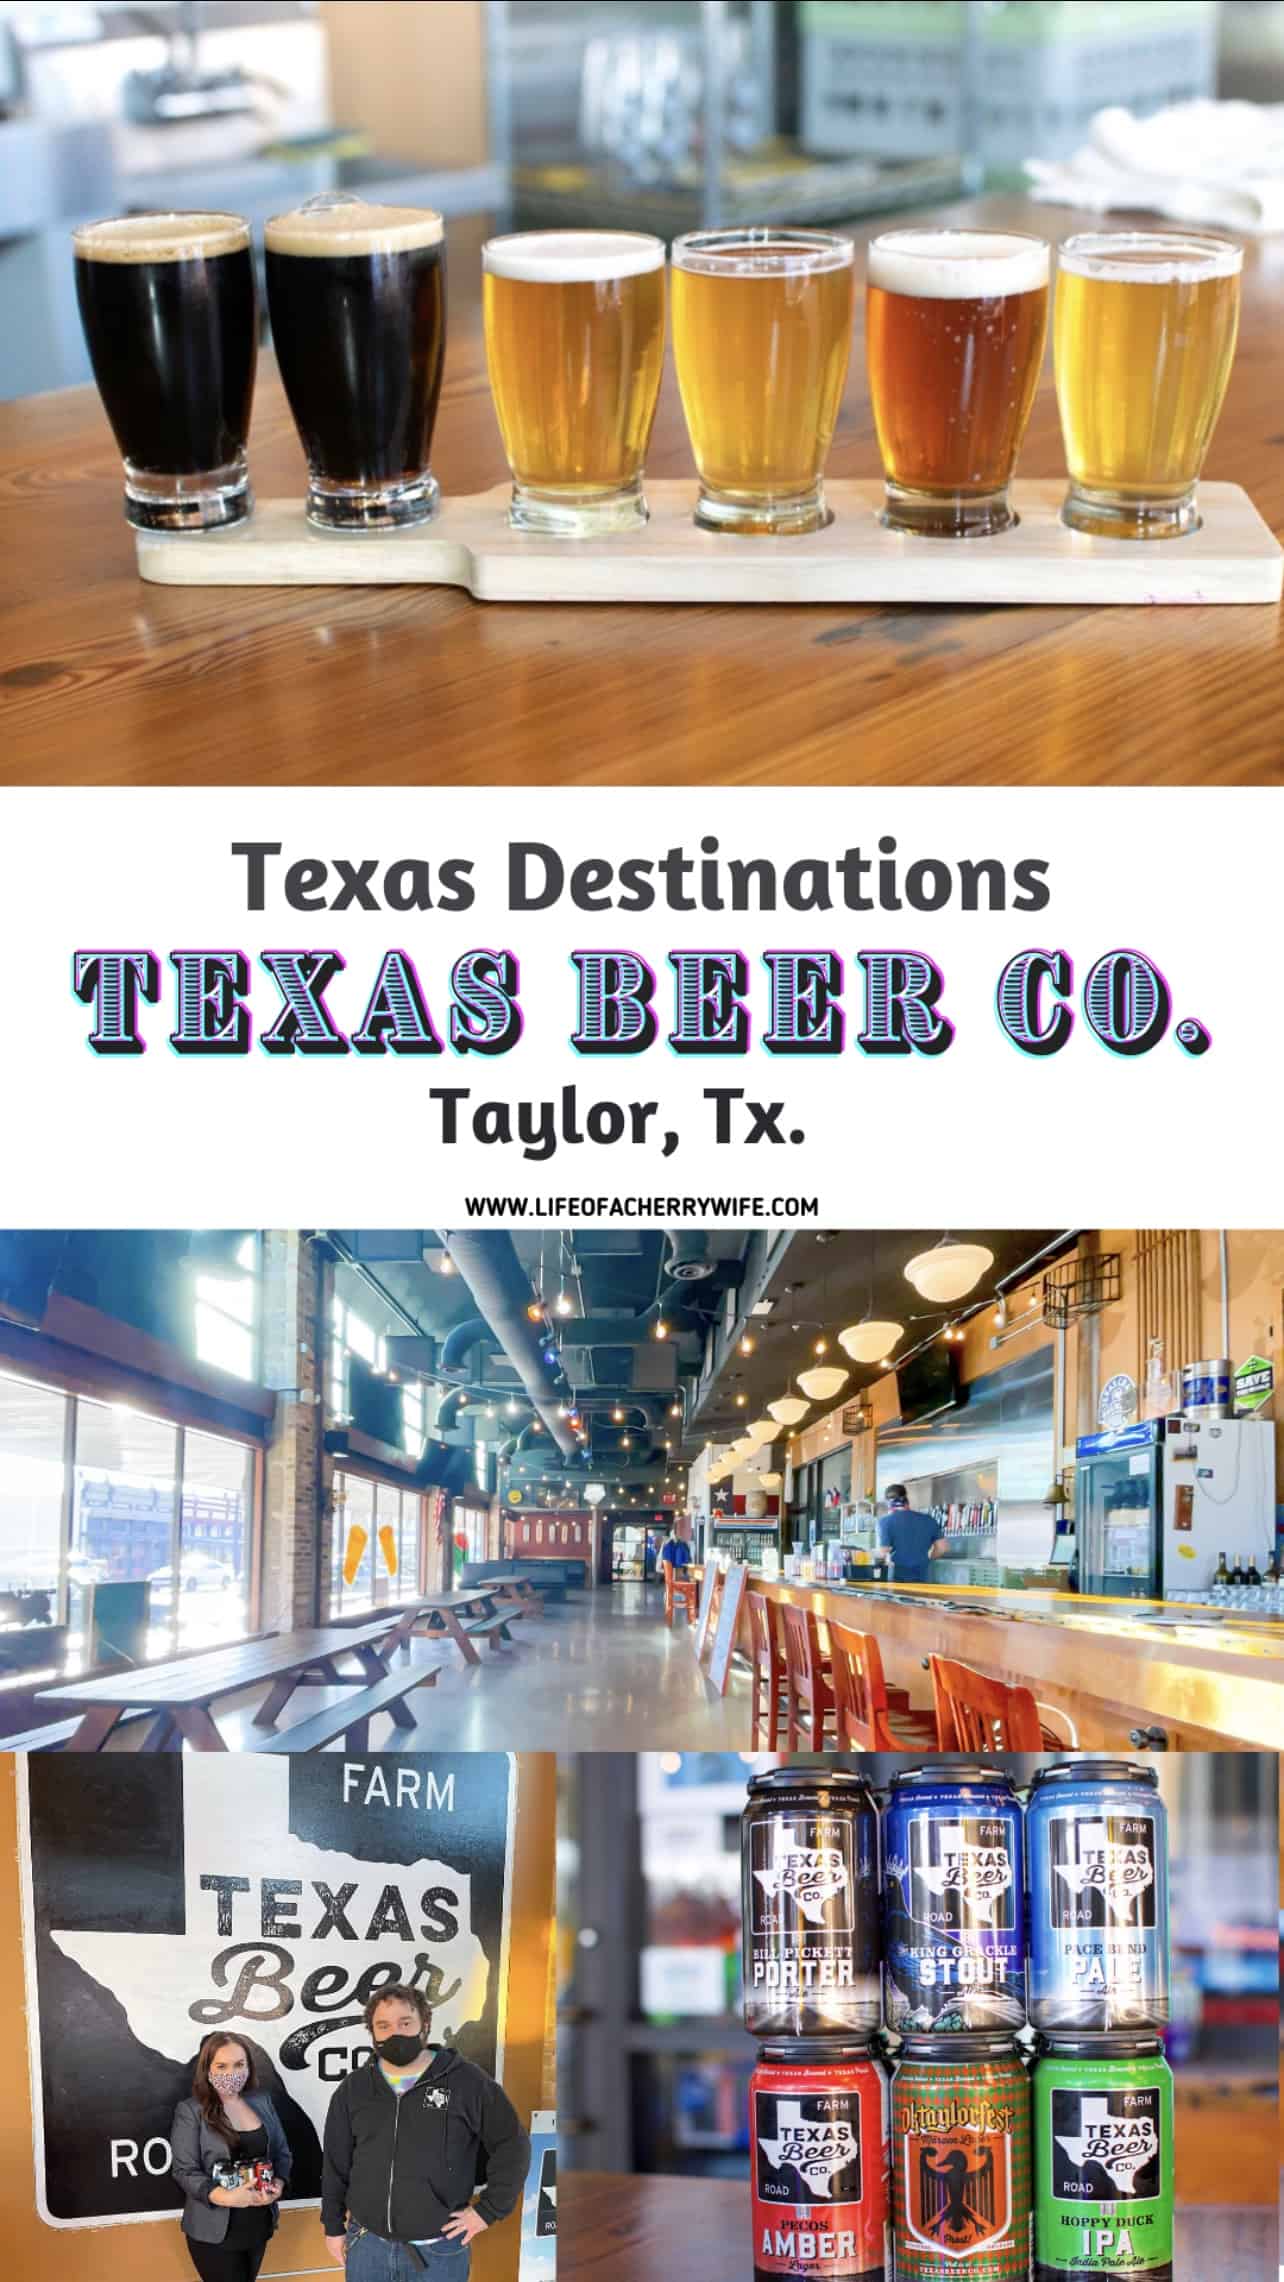 Texas Beer Co. Brewery and Taproom. Texas Day Trip Destination. #brewery #texas #taproom #craftbeer